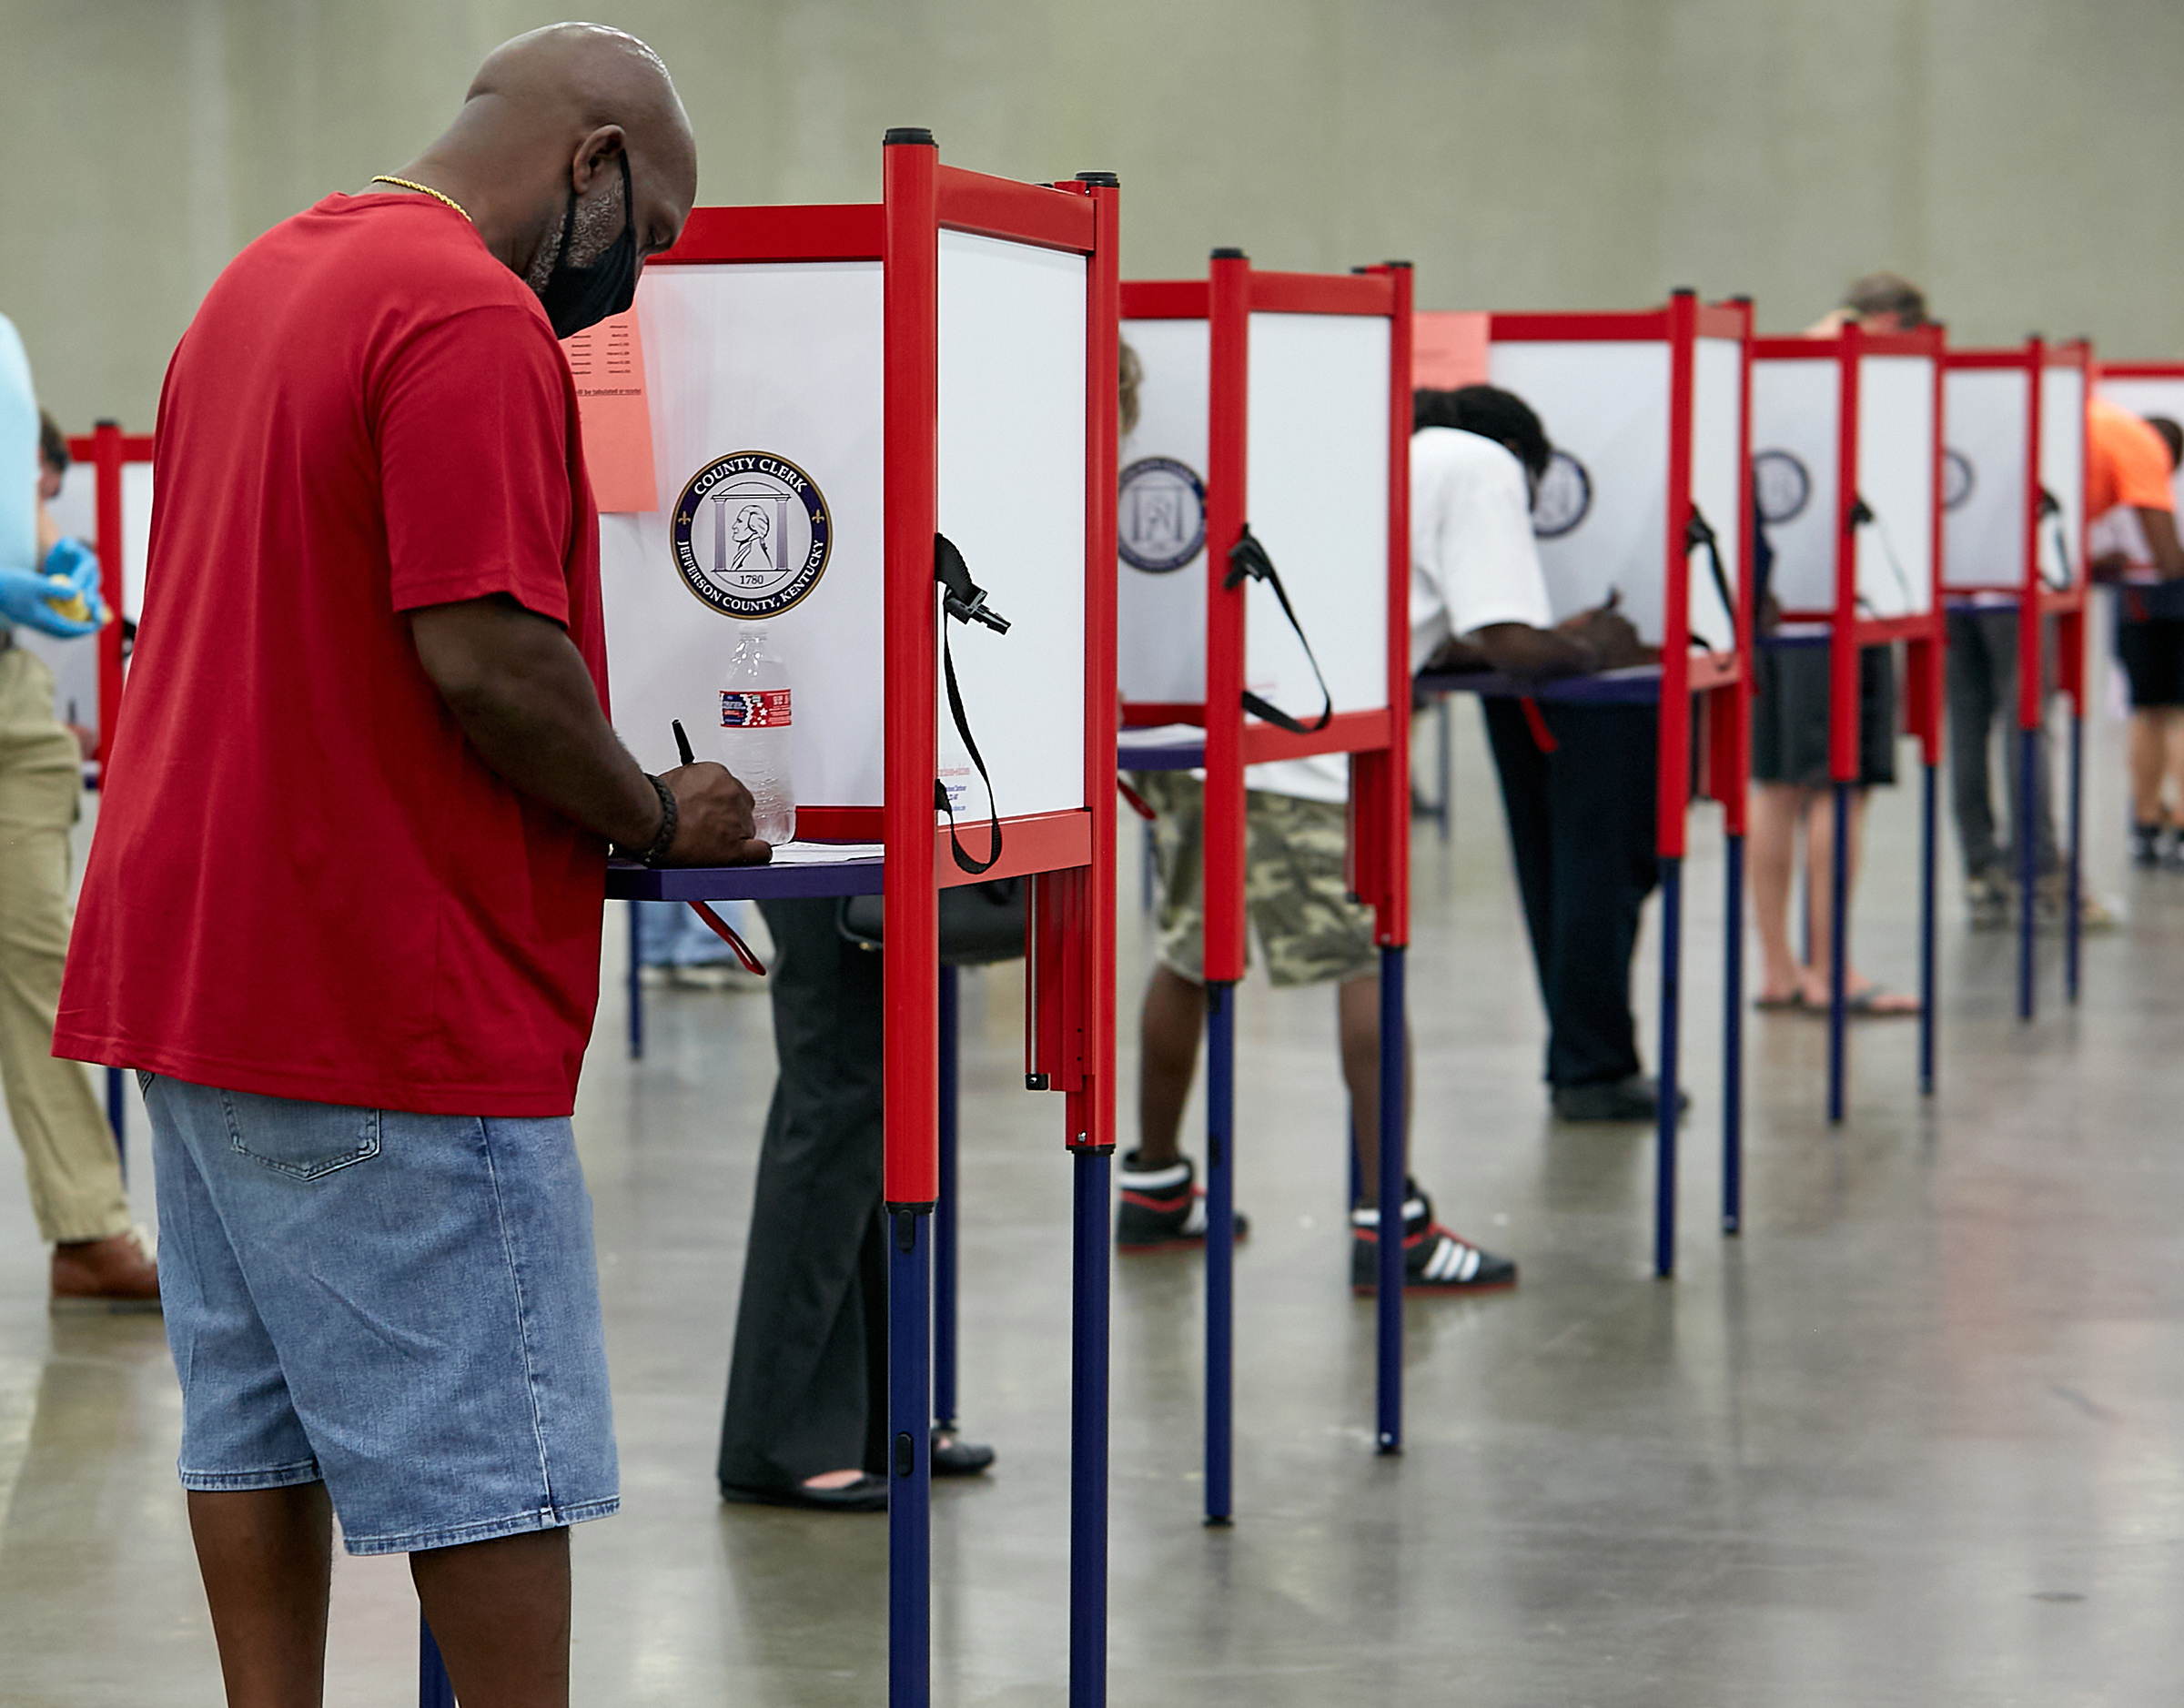 Primary voters cast their ballots at a polling place in Louisville, Ky., on June 23 (Erik Branch—The New York Times/Redux)